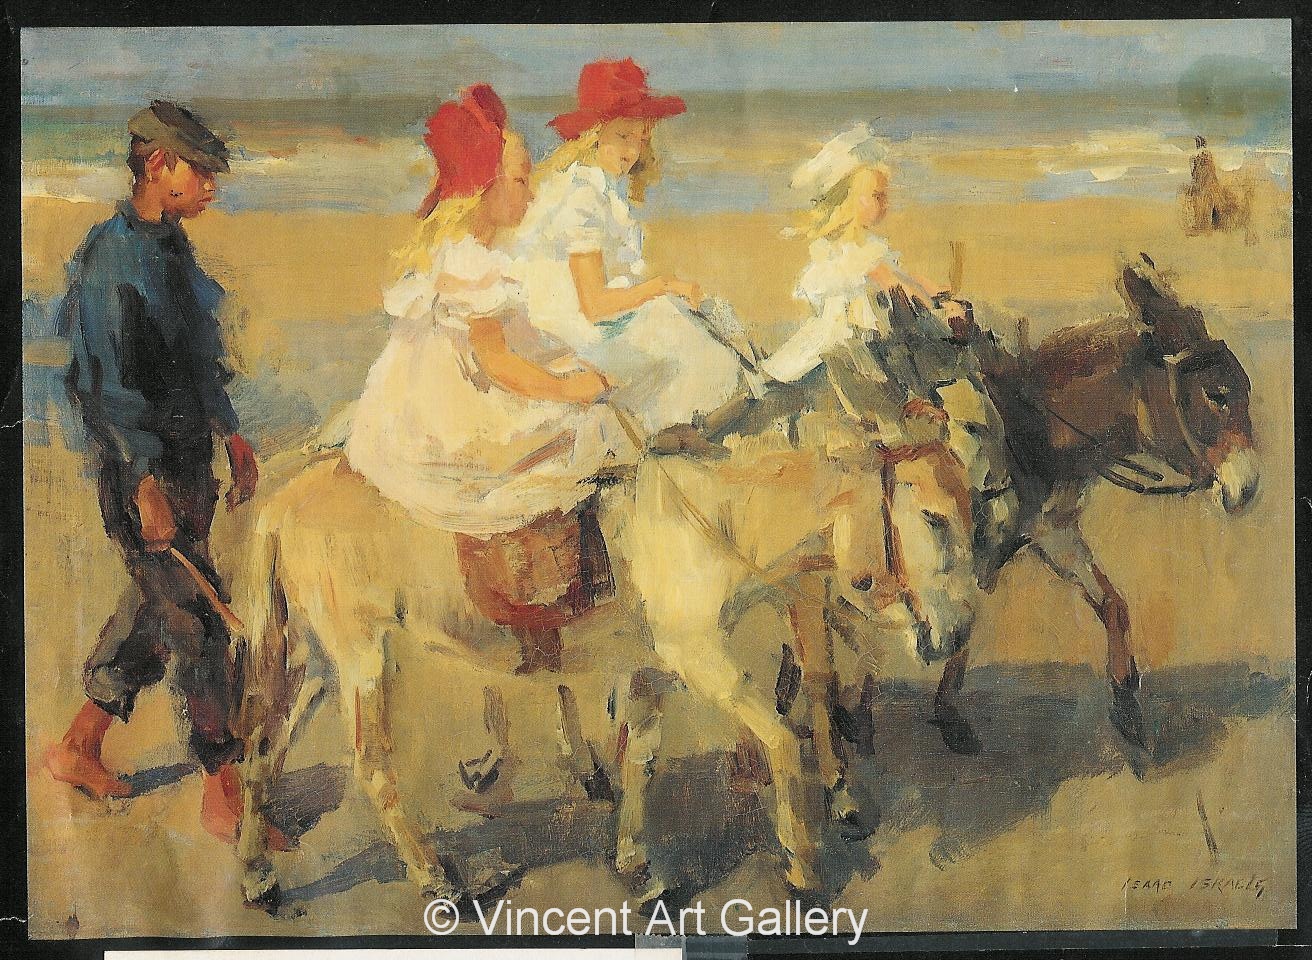 A410, ISRAELS, Riding the Donkey along the Beach